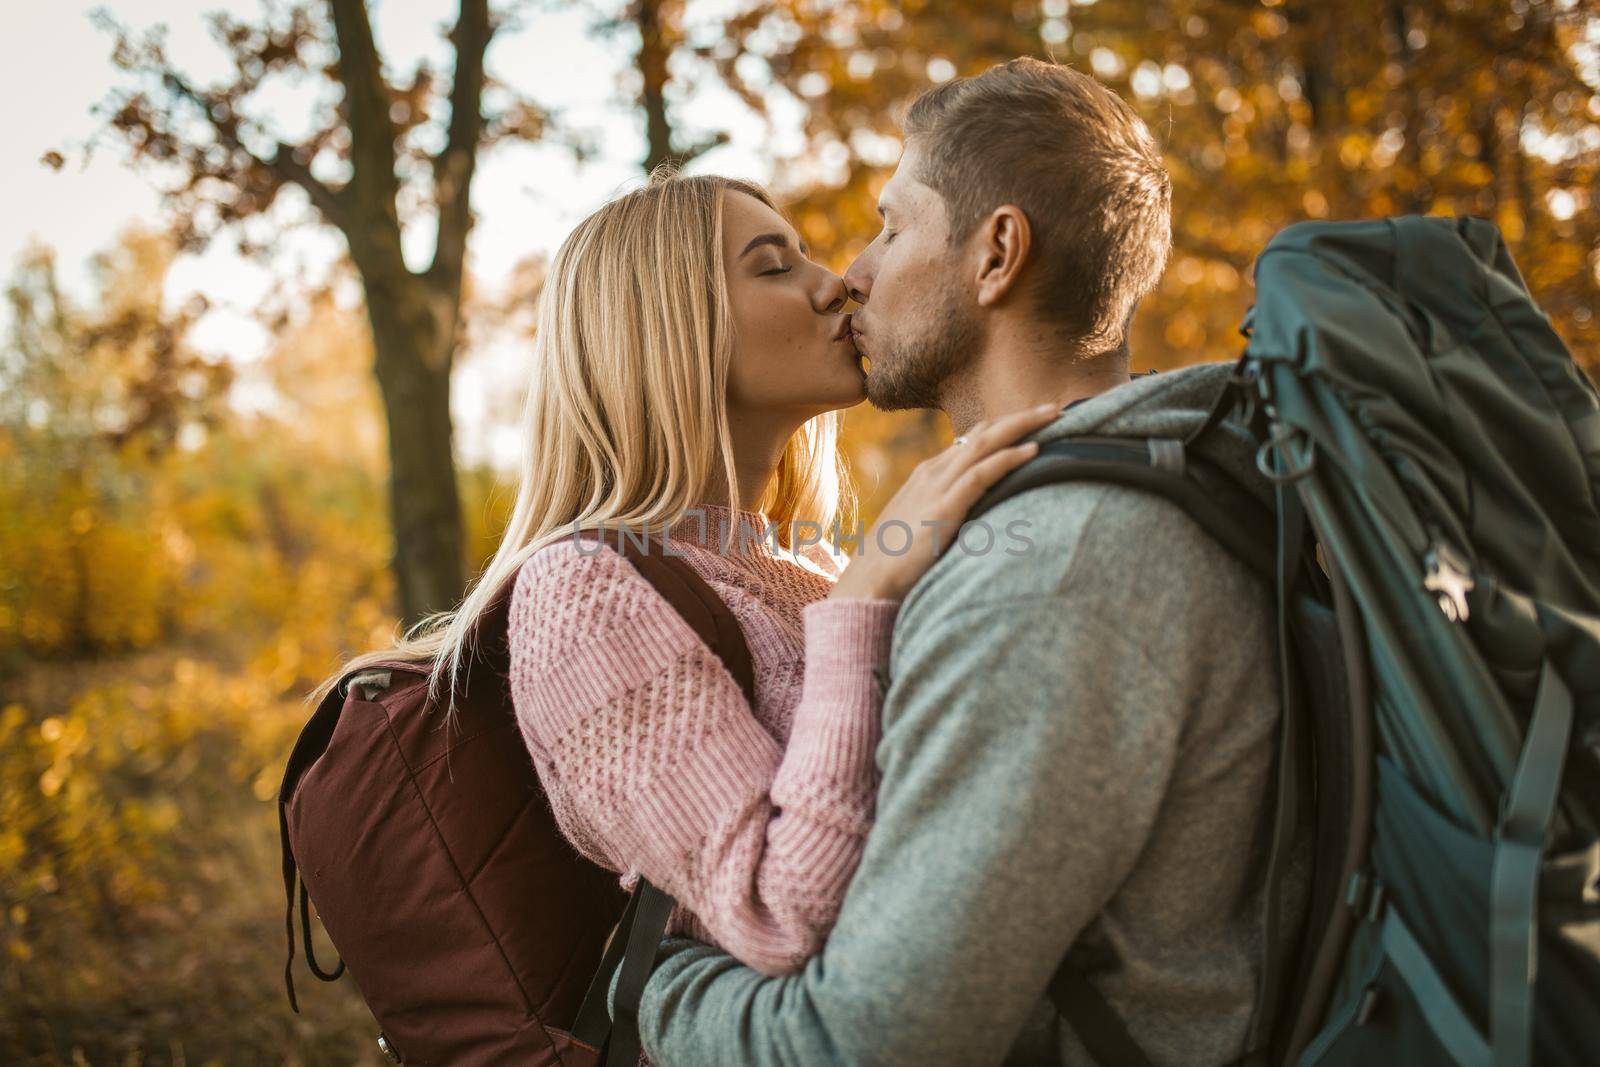 Couple Of Tourists Kissing in Forest Outdoors, Man And Woman Hug And Kiss Standing Outdoors With Yellow Trees On Backgroung, Portrait Of Cheerful Backpackers Standind In In Sunlight